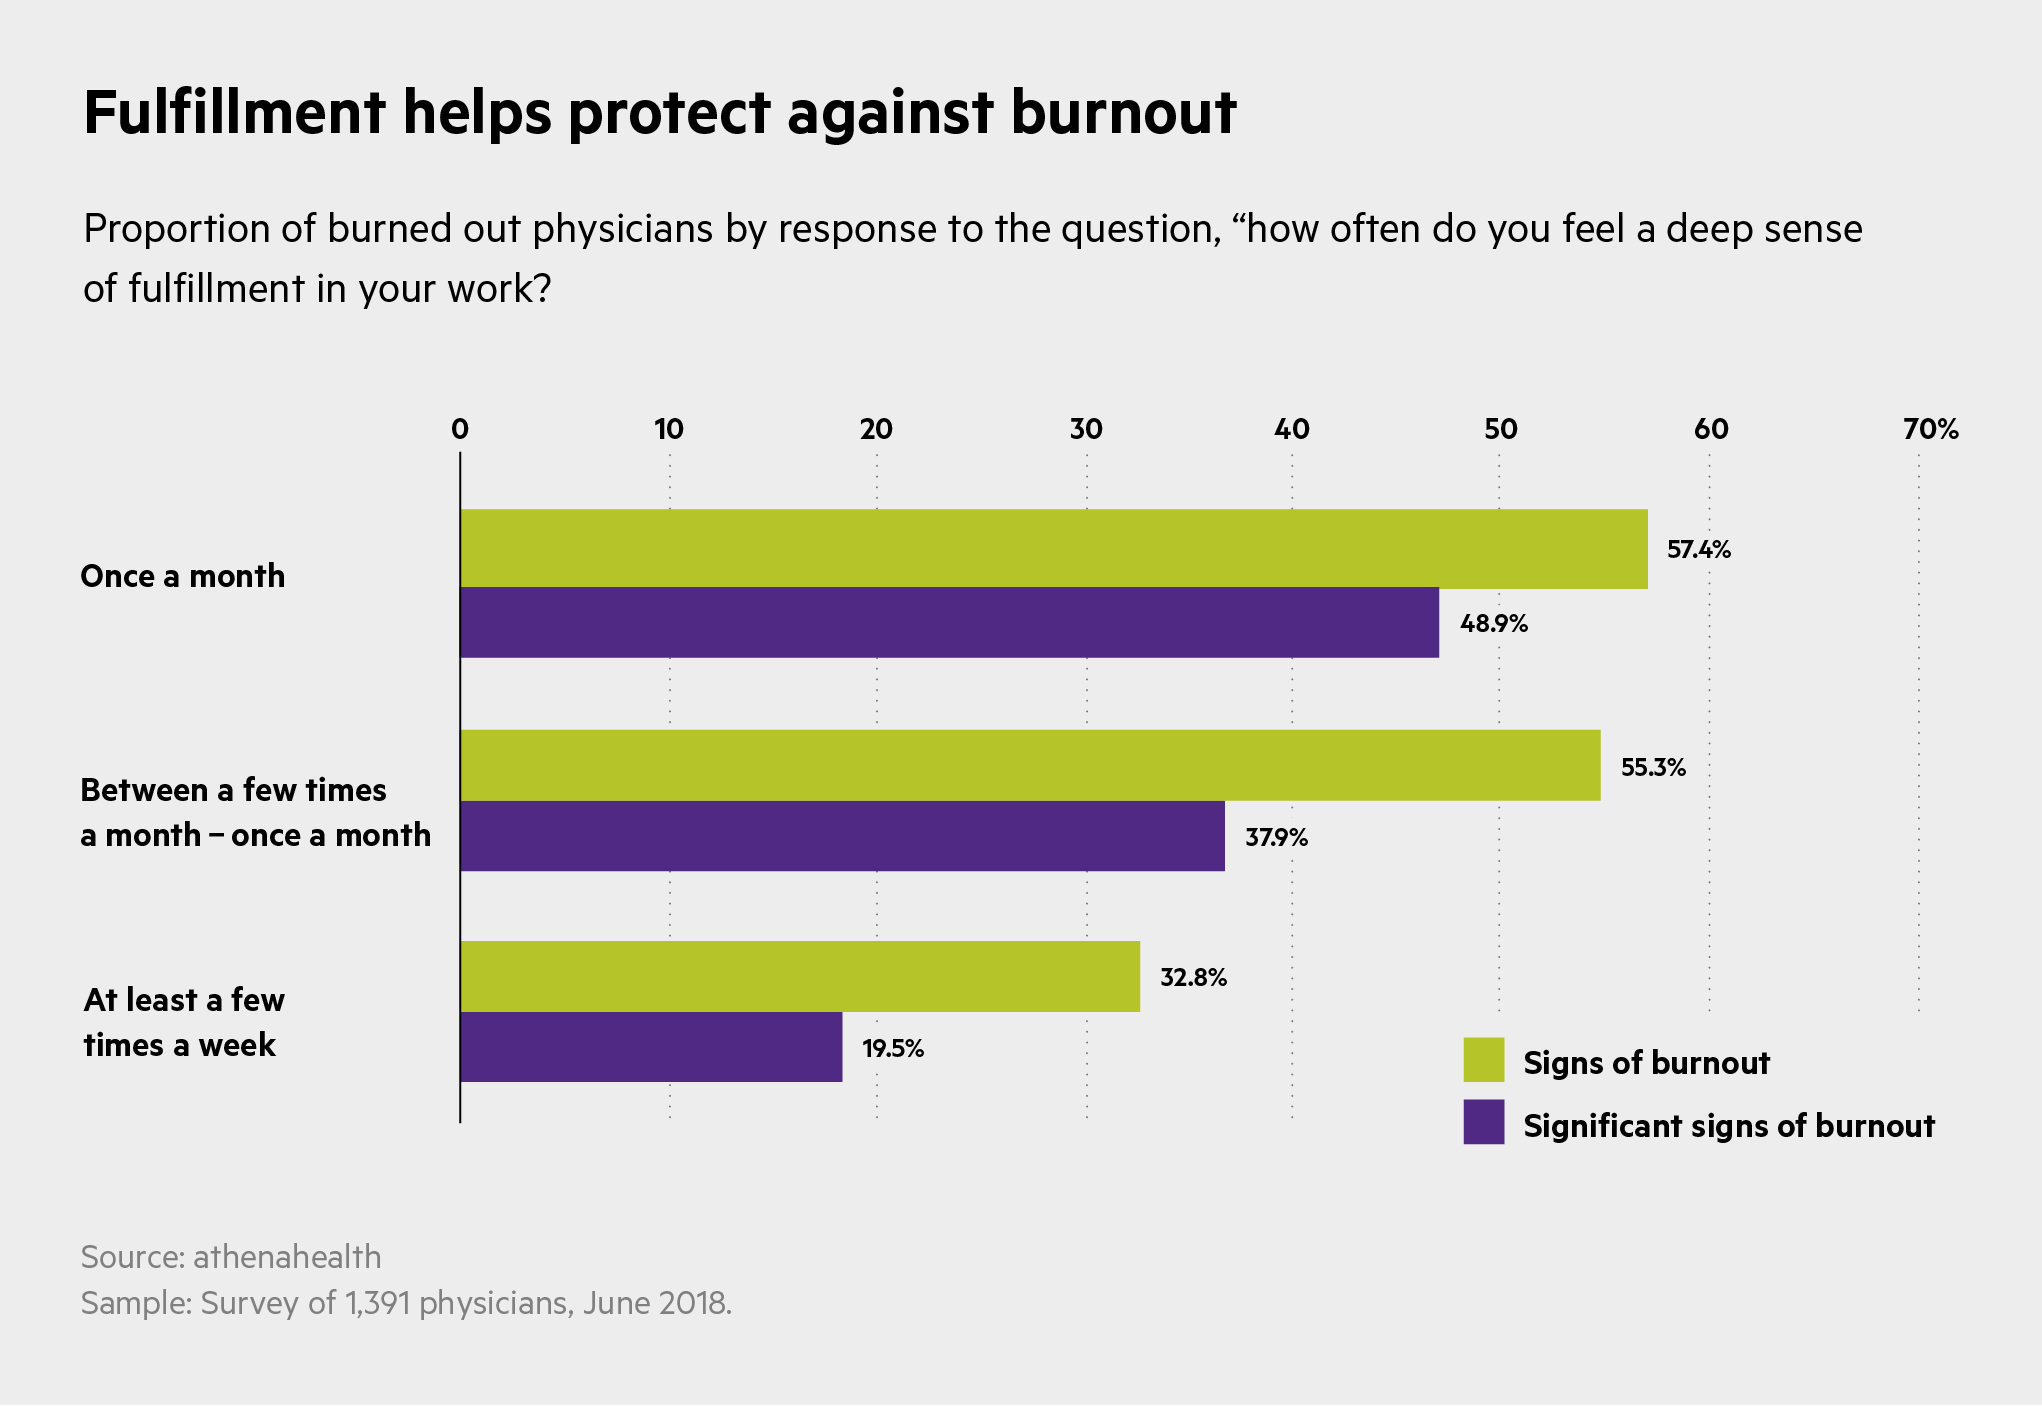 Bar chart on fulfillment and its impact on burnout